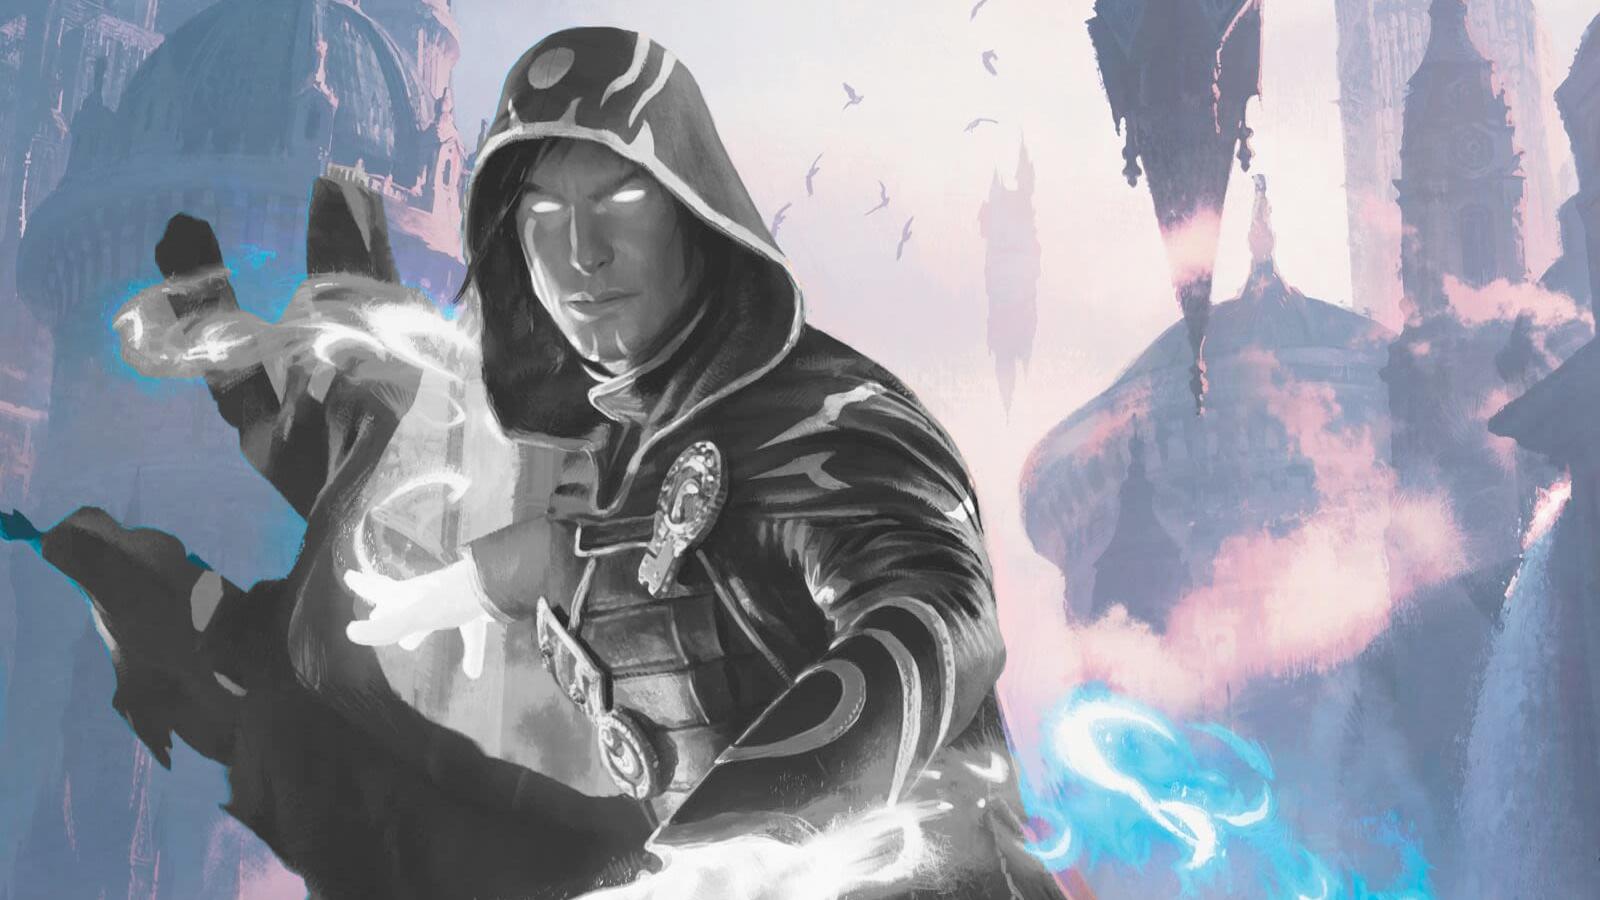 Jace Planeswalker from MTG in black and white to represent going away